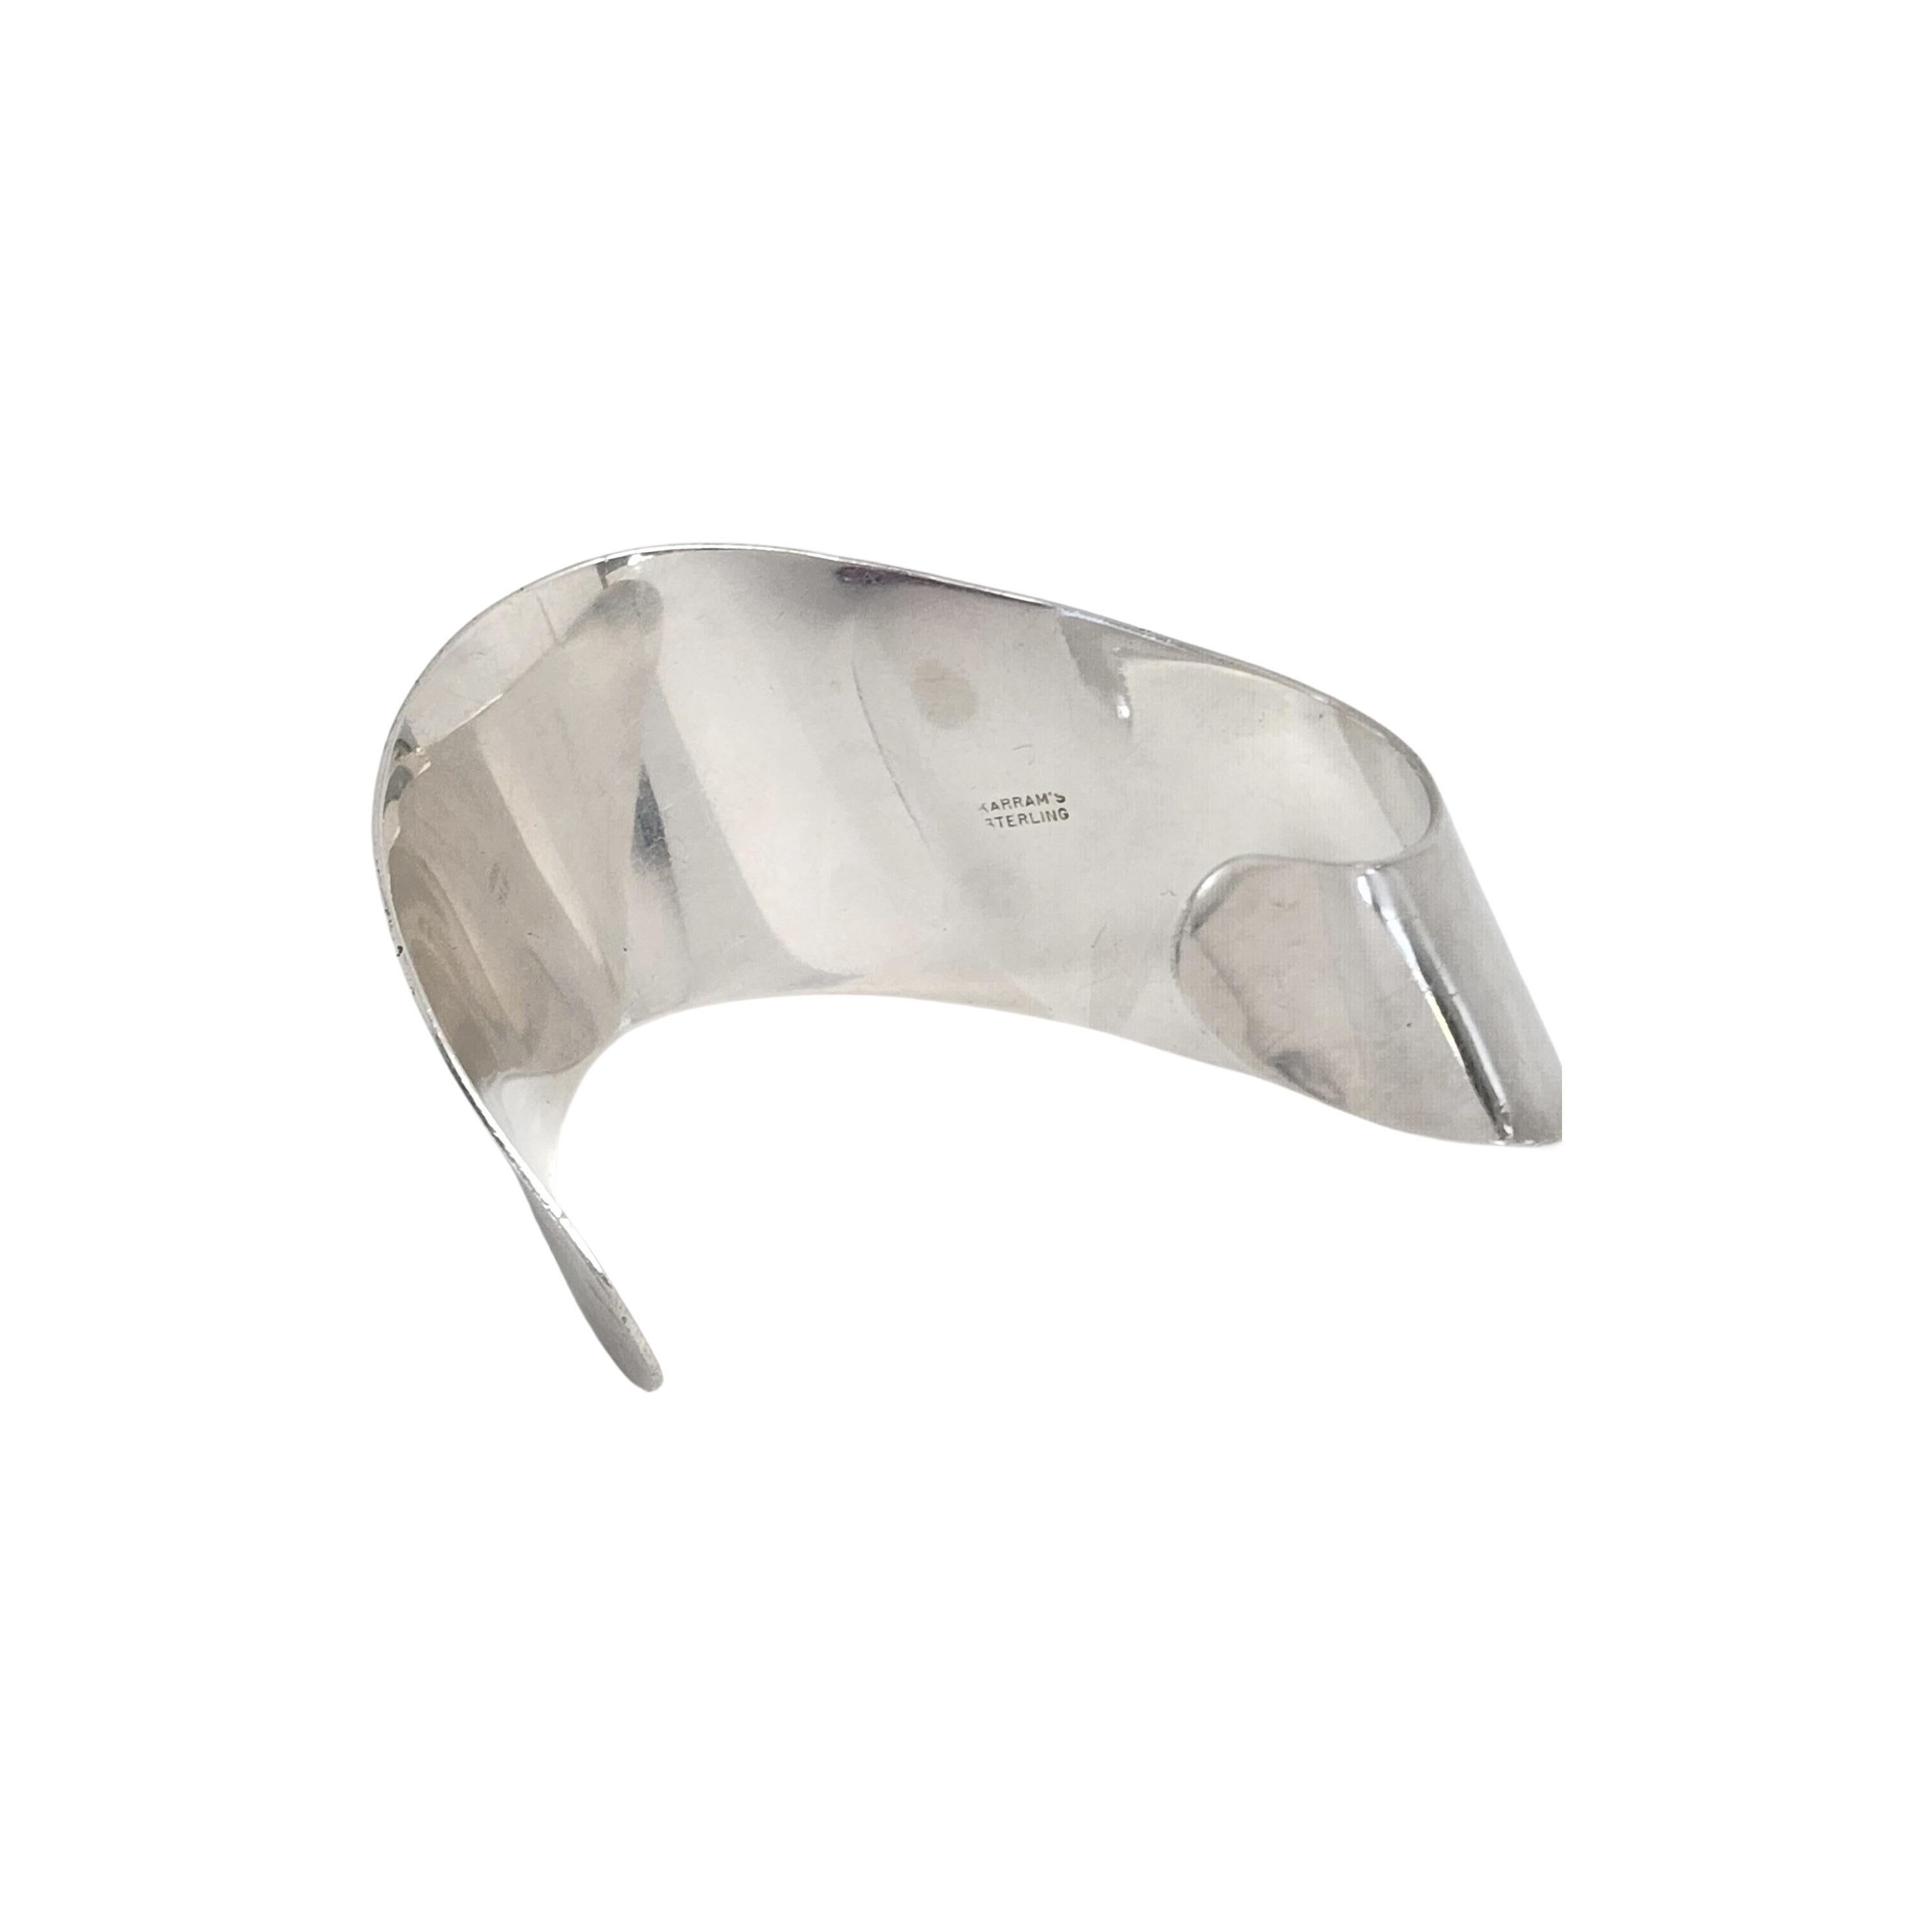 Alfred Karram Sterling Silver Modernist Cuff Bracelet #13276 In Good Condition For Sale In Washington Depot, CT